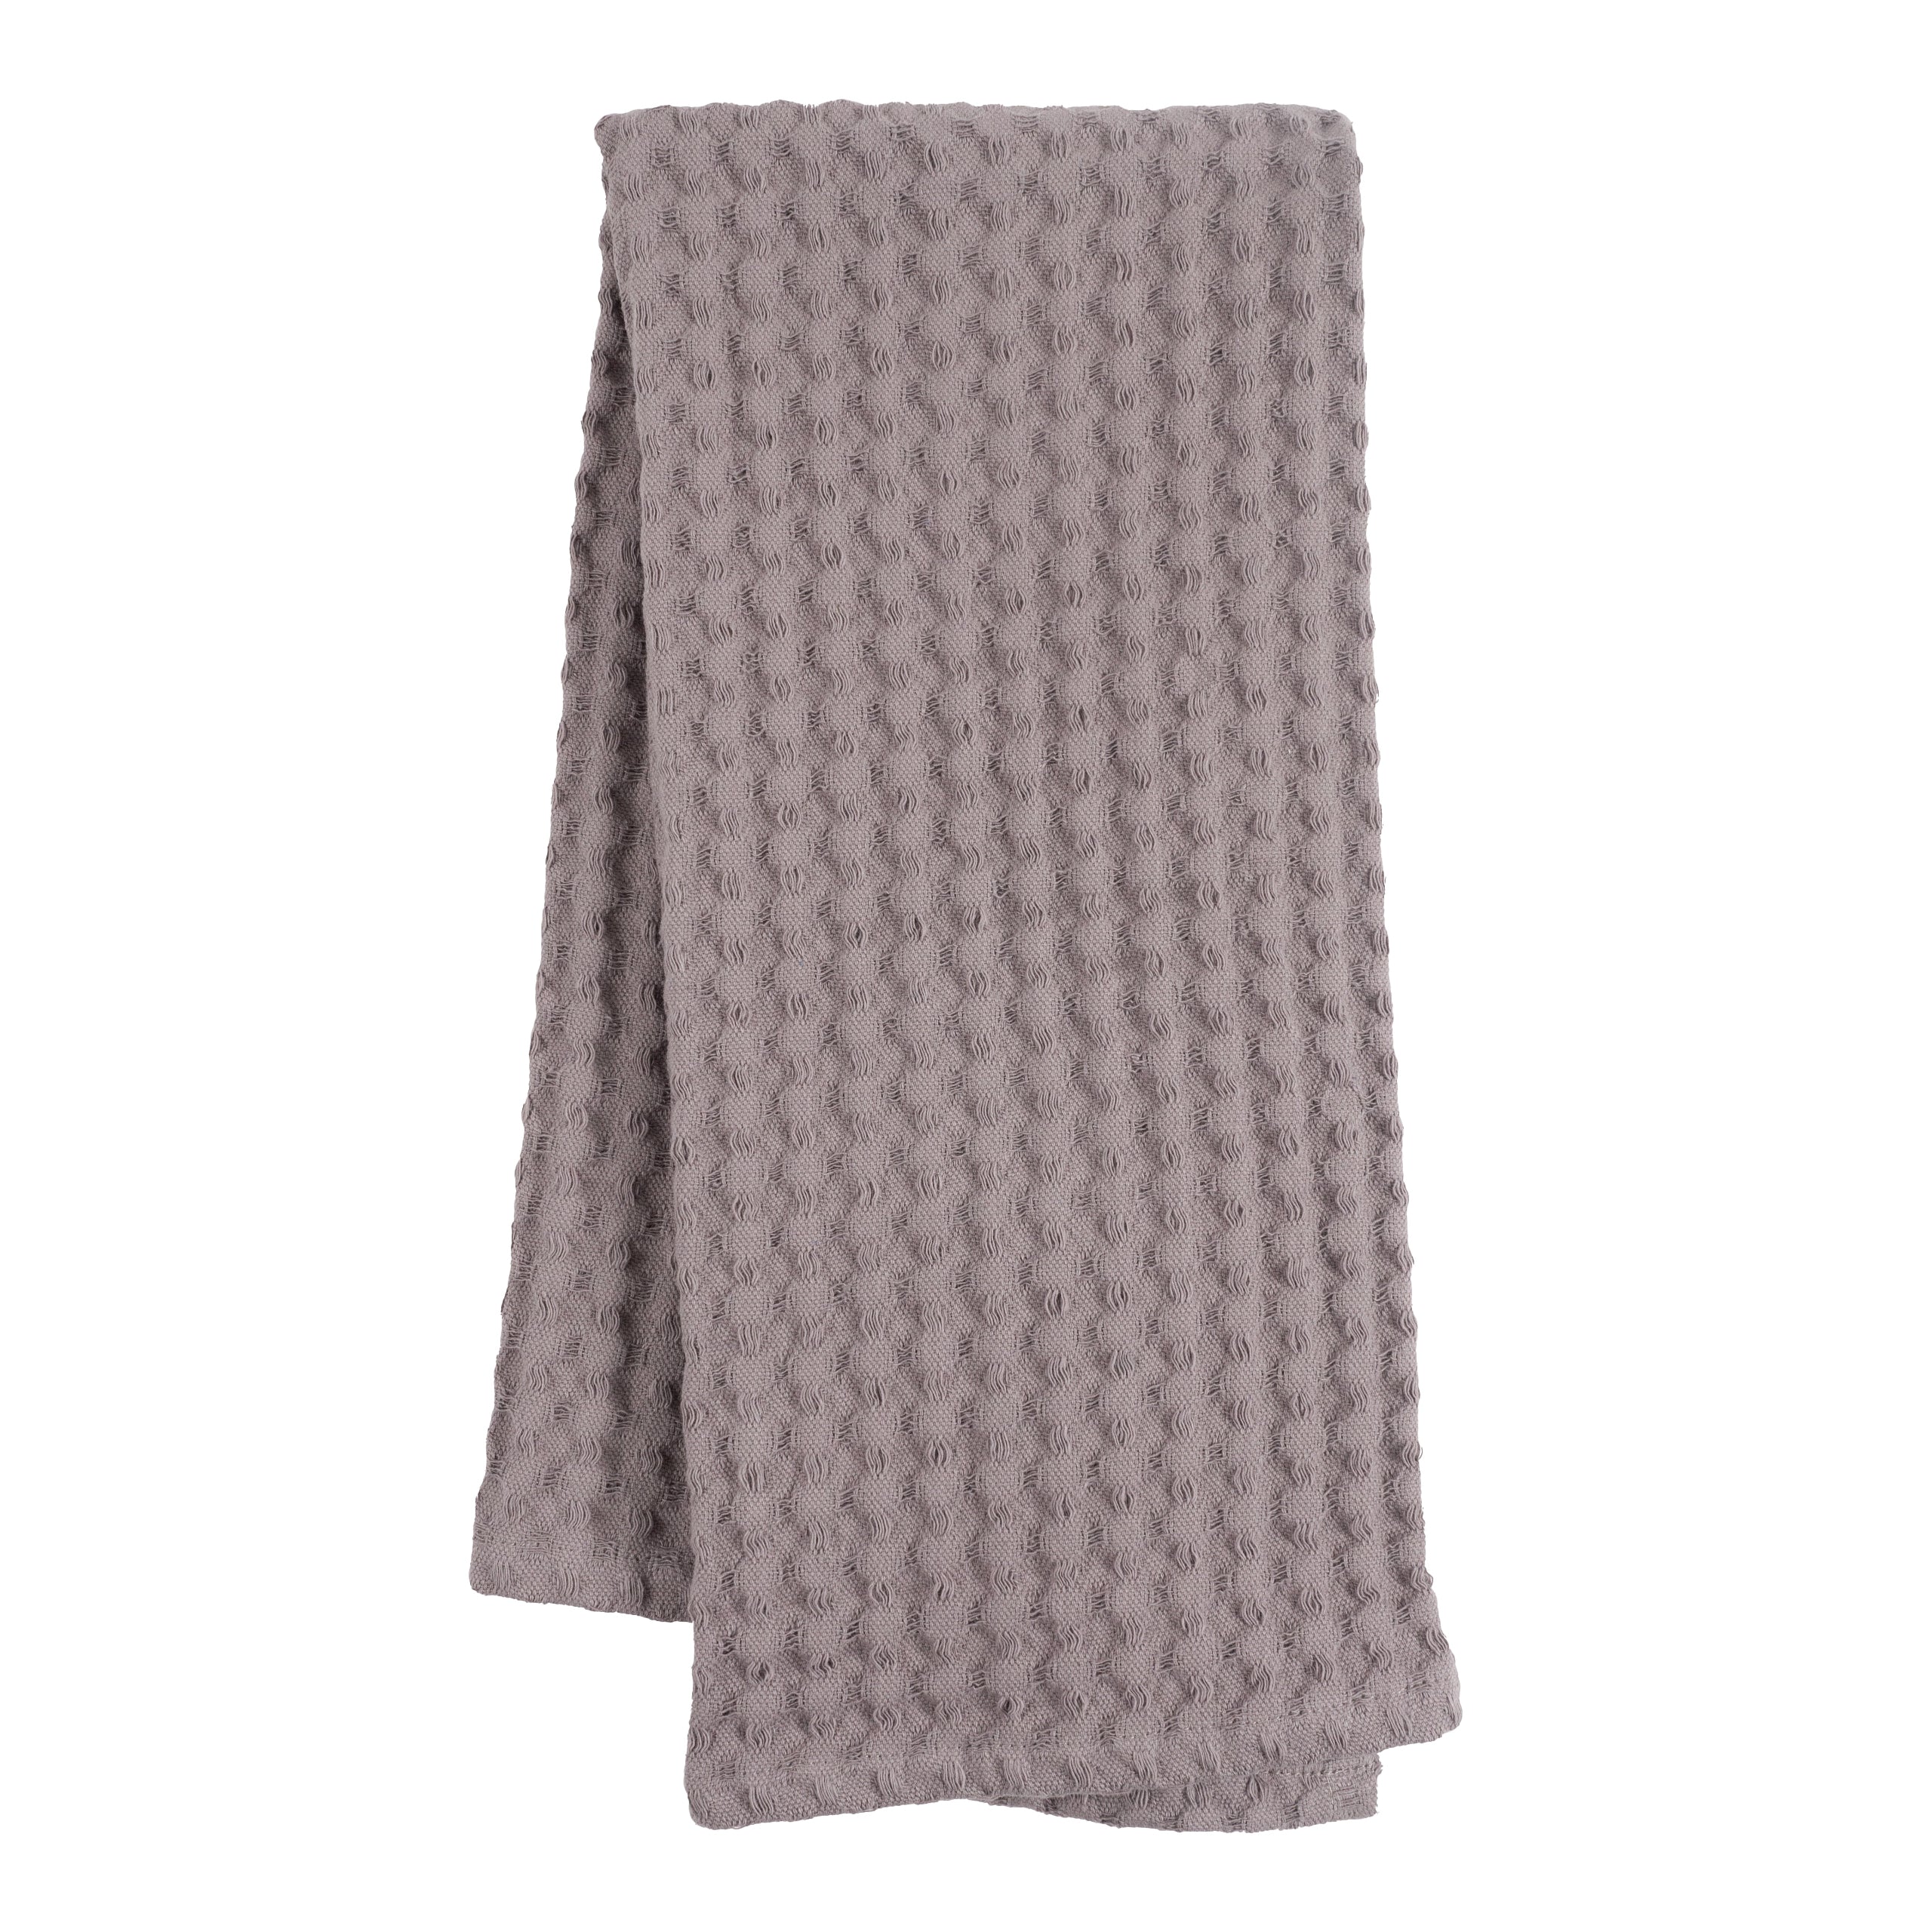 Kitchen Dish Towels Cotton Linen Organic Waffle Towel Absorbent